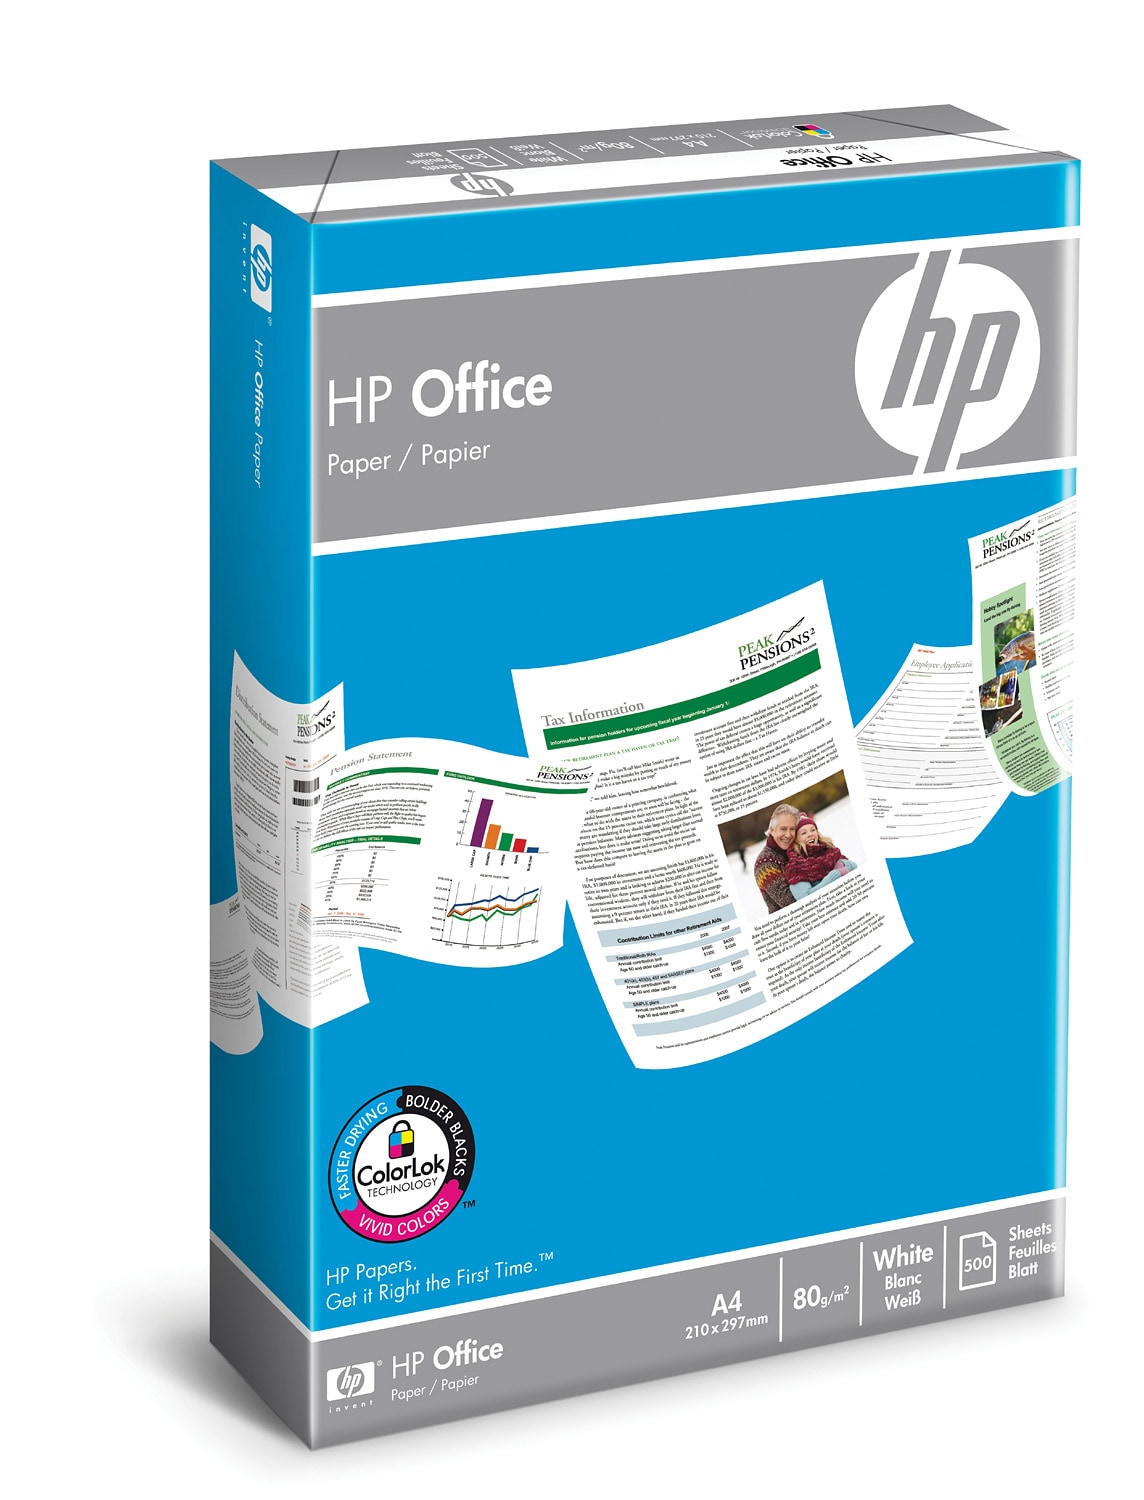 HP Office Paper-5 reams/4-hole punched/A4/210 x 297 mm | HP® South Africa